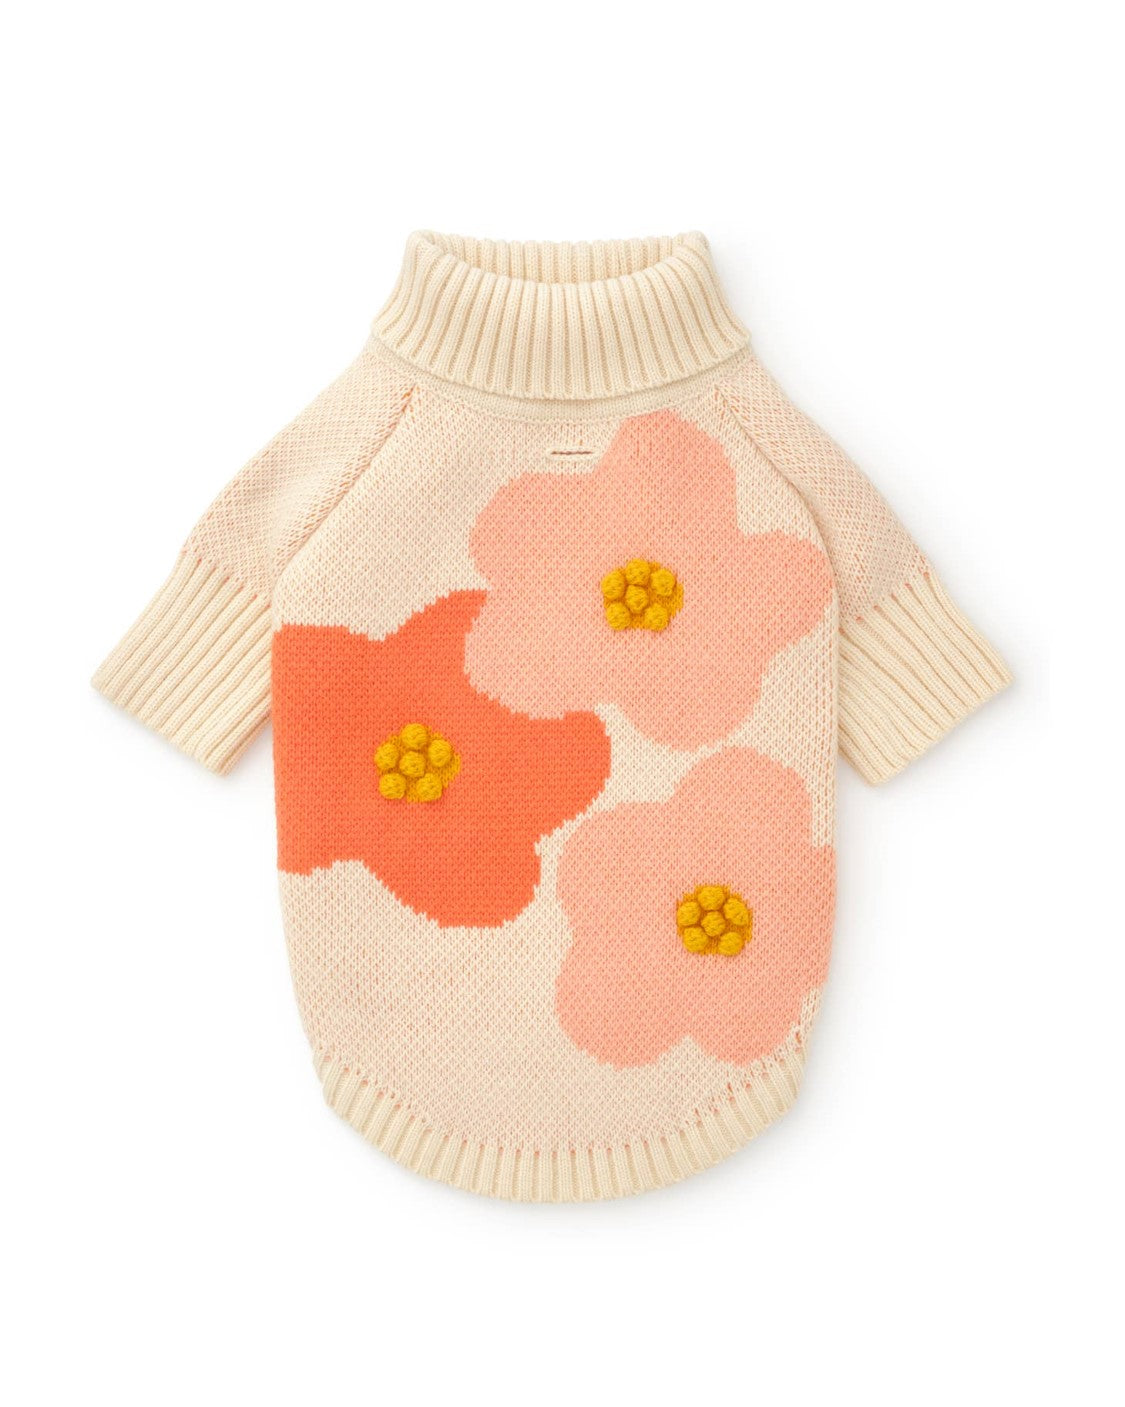 In Bloom Spring Dog Sweater by Foggy Dog  image